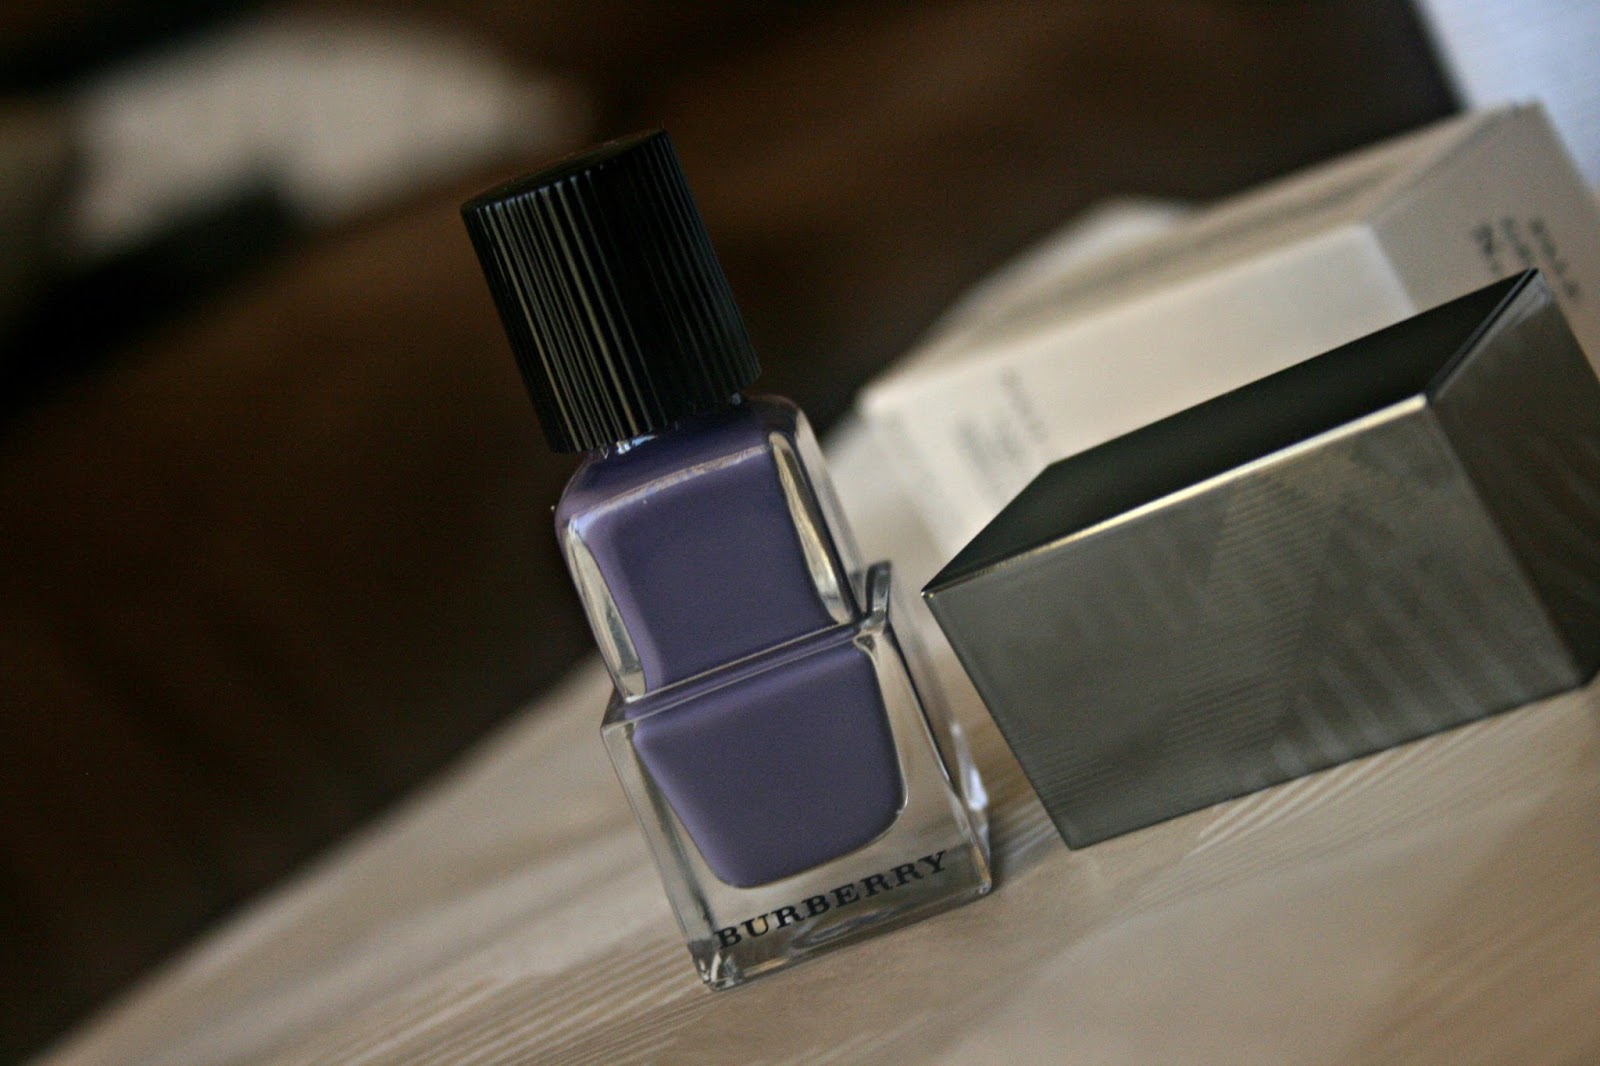 Burberry Beauty Nail Polish in Pale Grape No. 410 Review, Photos & Swatches